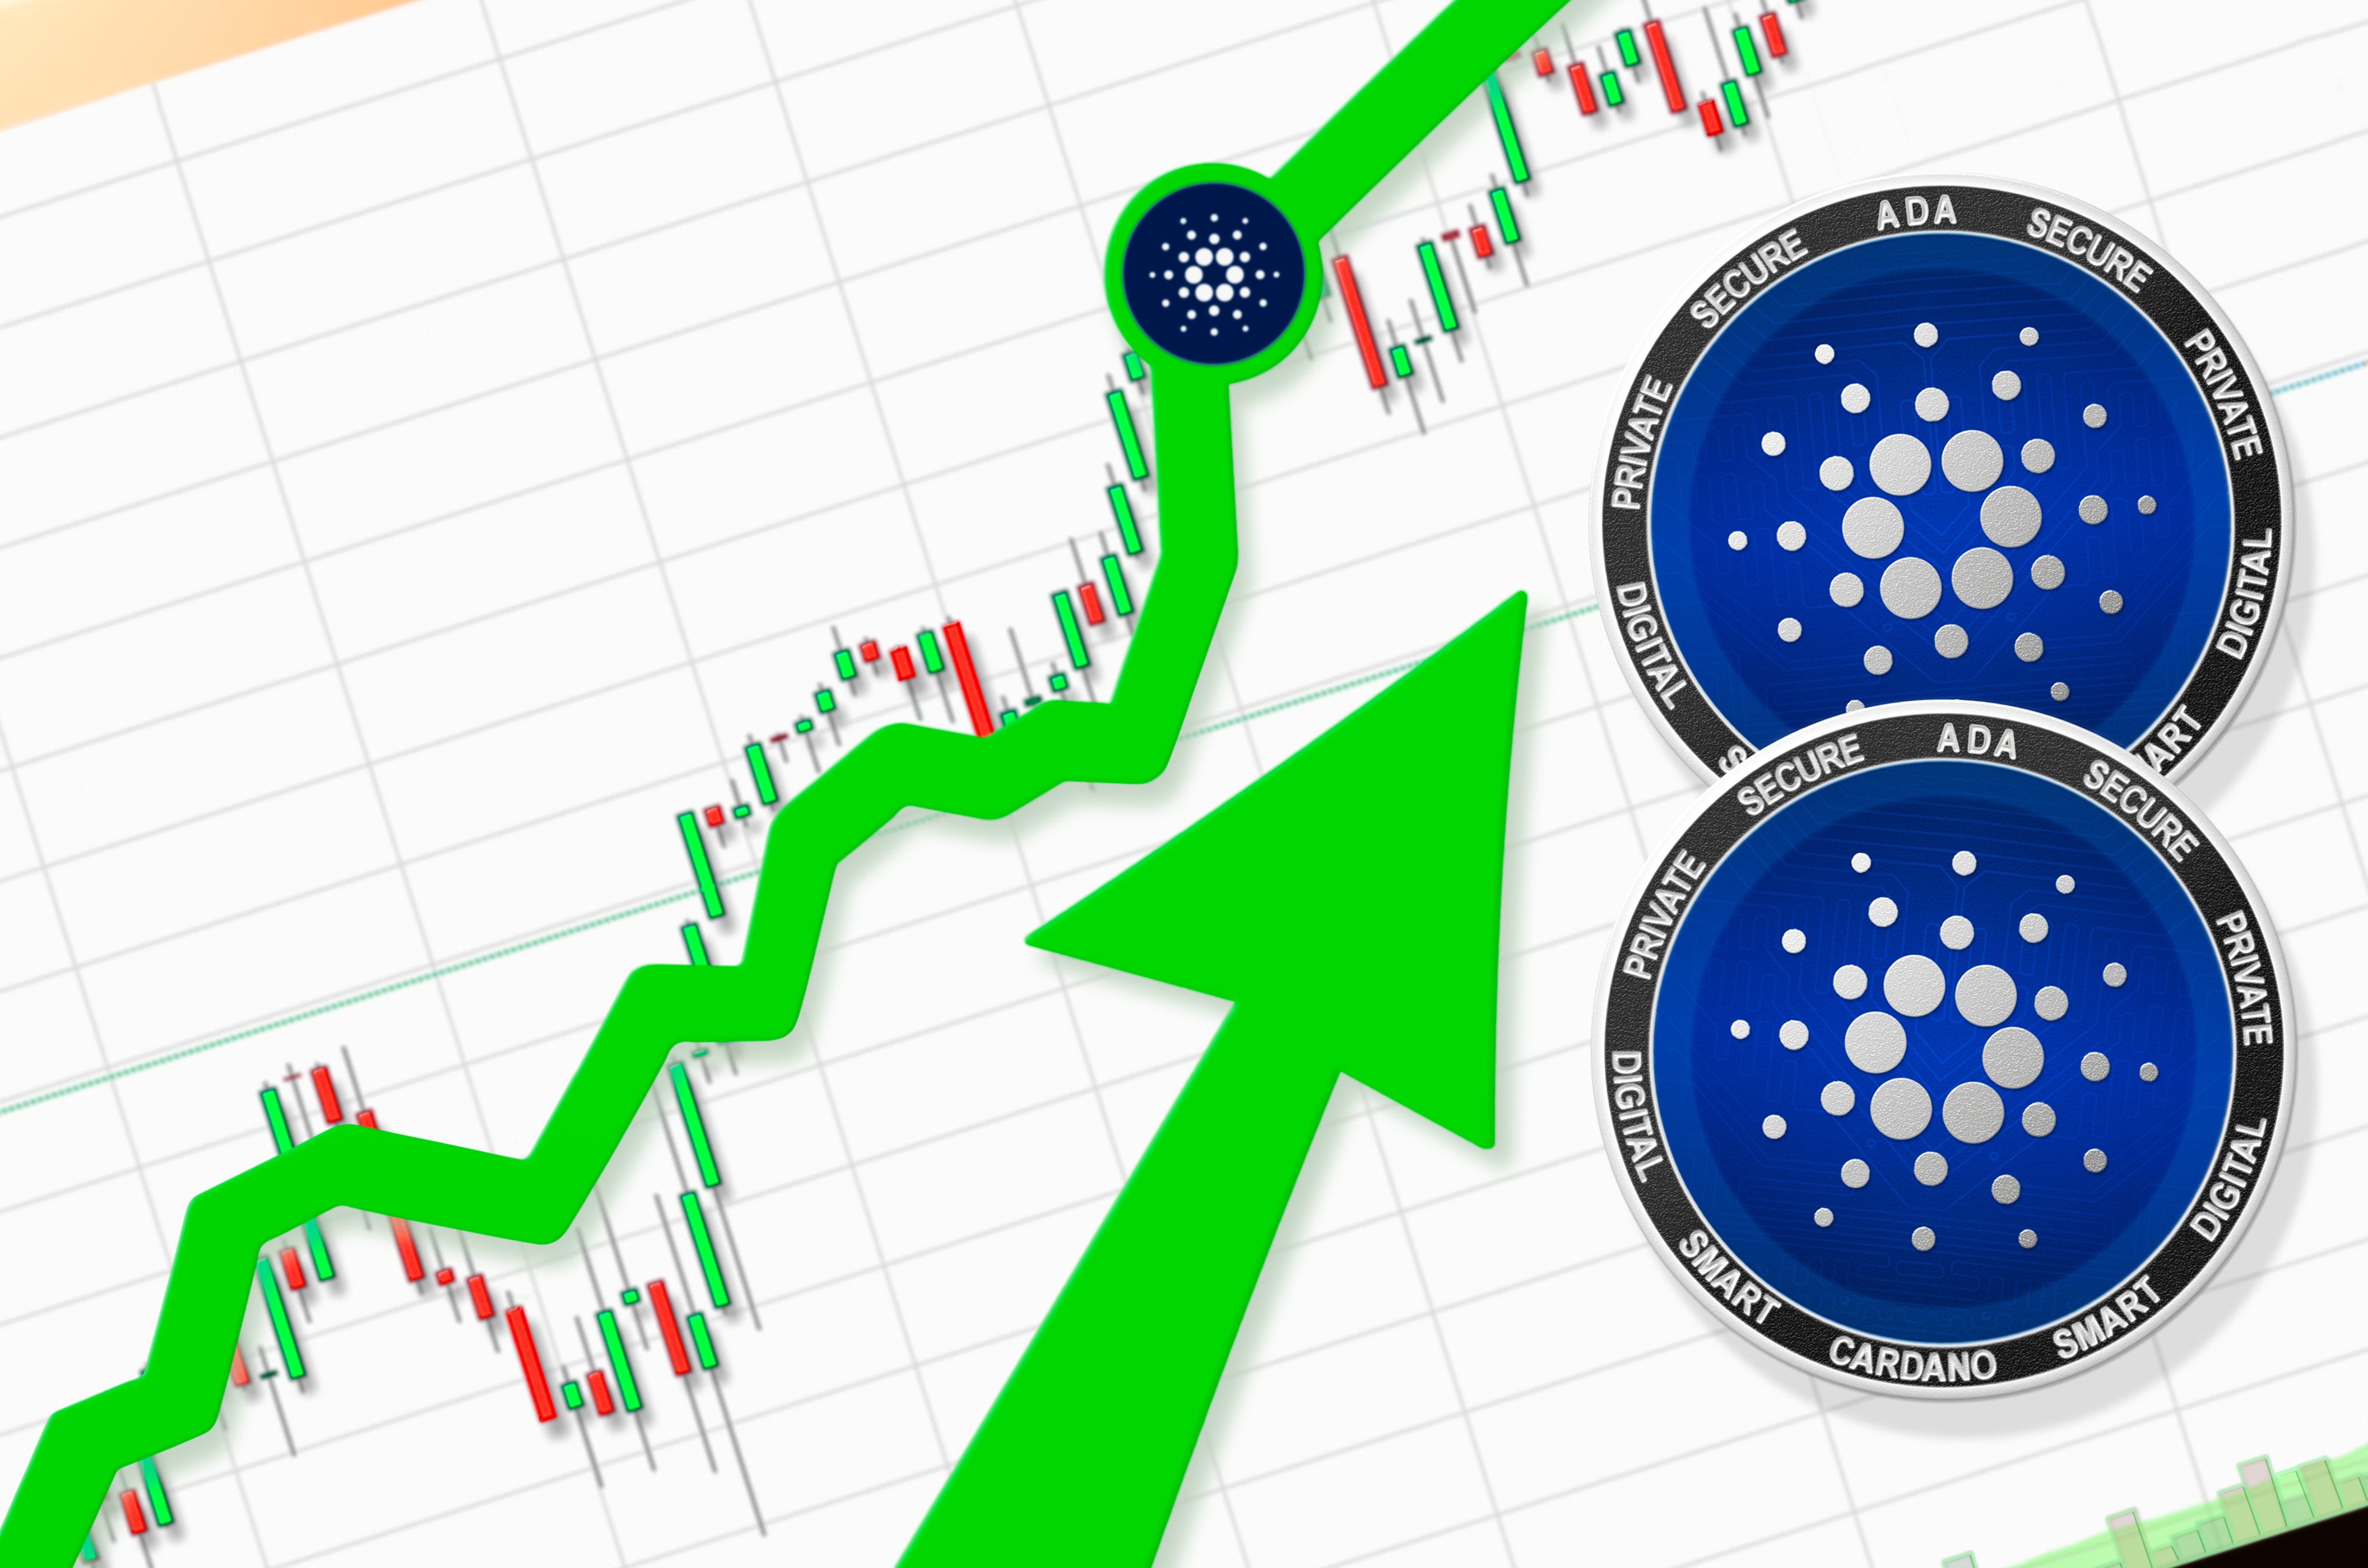 Cardano (ADA) Price Prediction for 2023, 2024, 2025 and Beyond